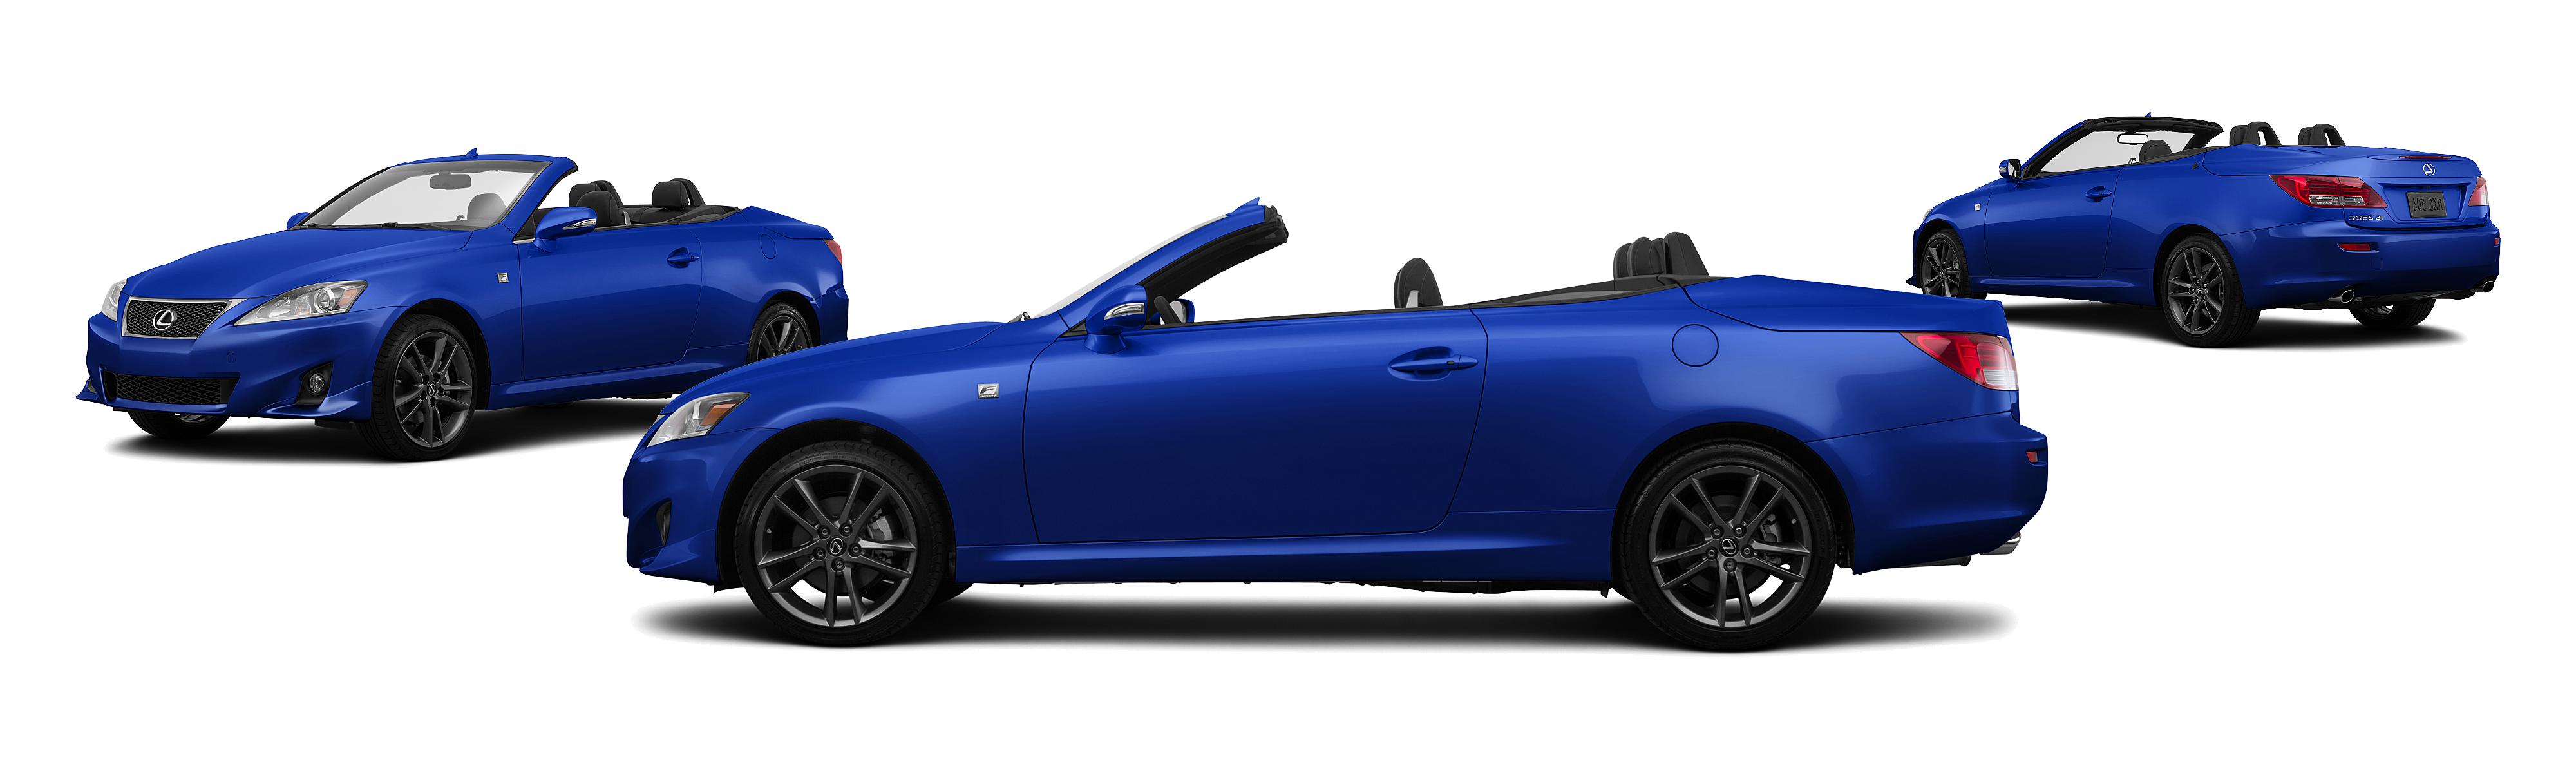 2015 Lexus IS 250C 2dr Convertible - Research - GrooveCar